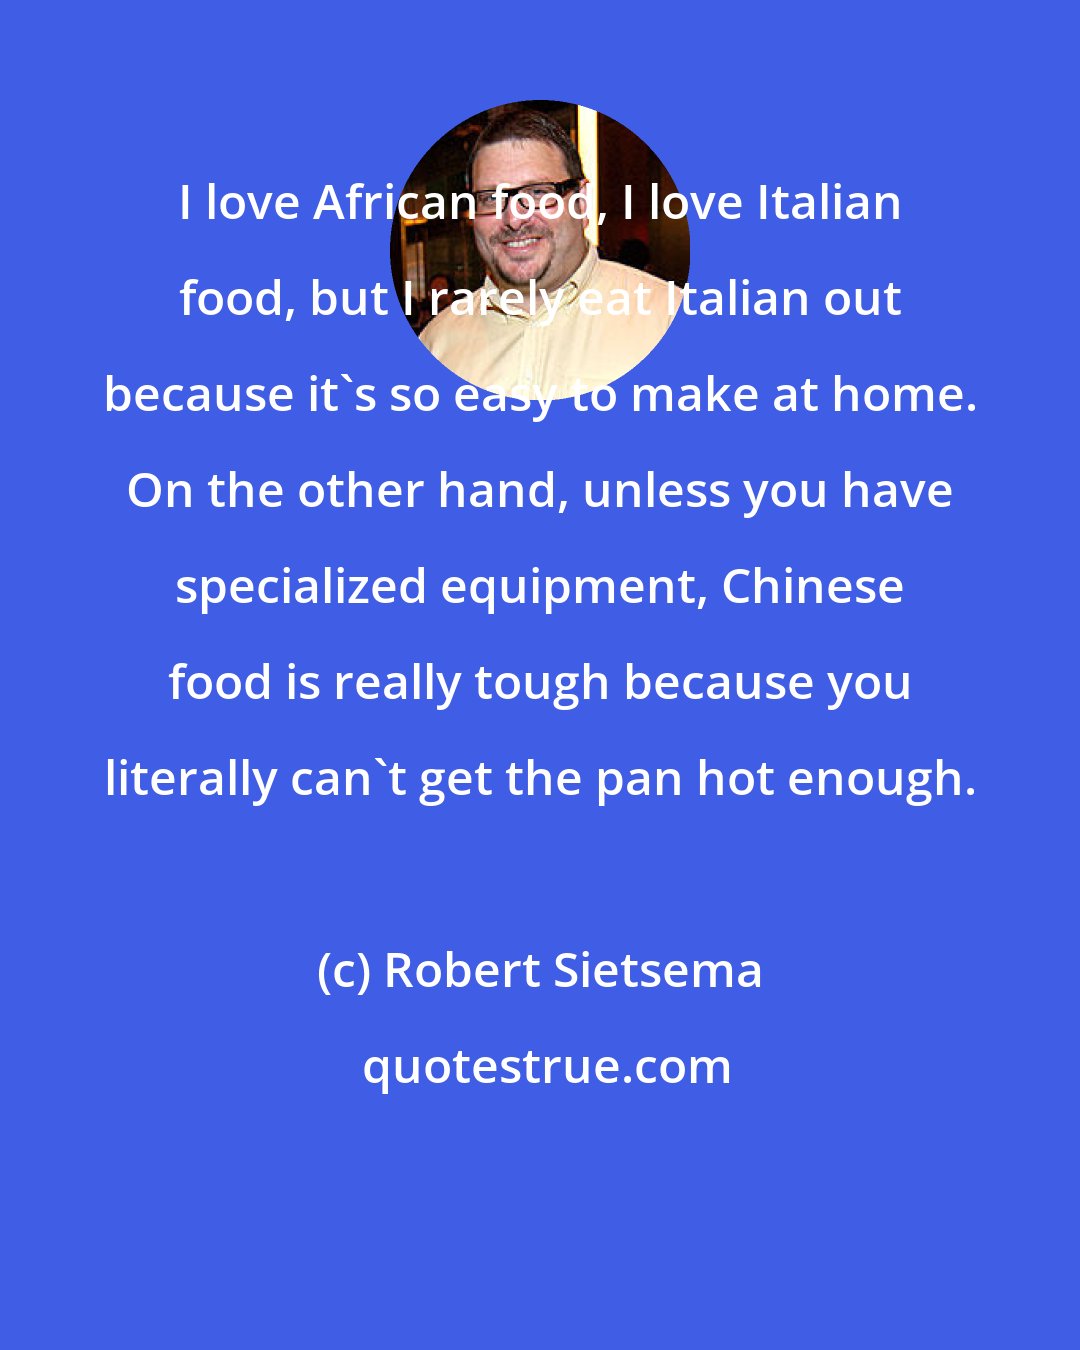 Robert Sietsema: I love African food, I love Italian food, but I rarely eat Italian out because it's so easy to make at home. On the other hand, unless you have specialized equipment, Chinese food is really tough because you literally can't get the pan hot enough.